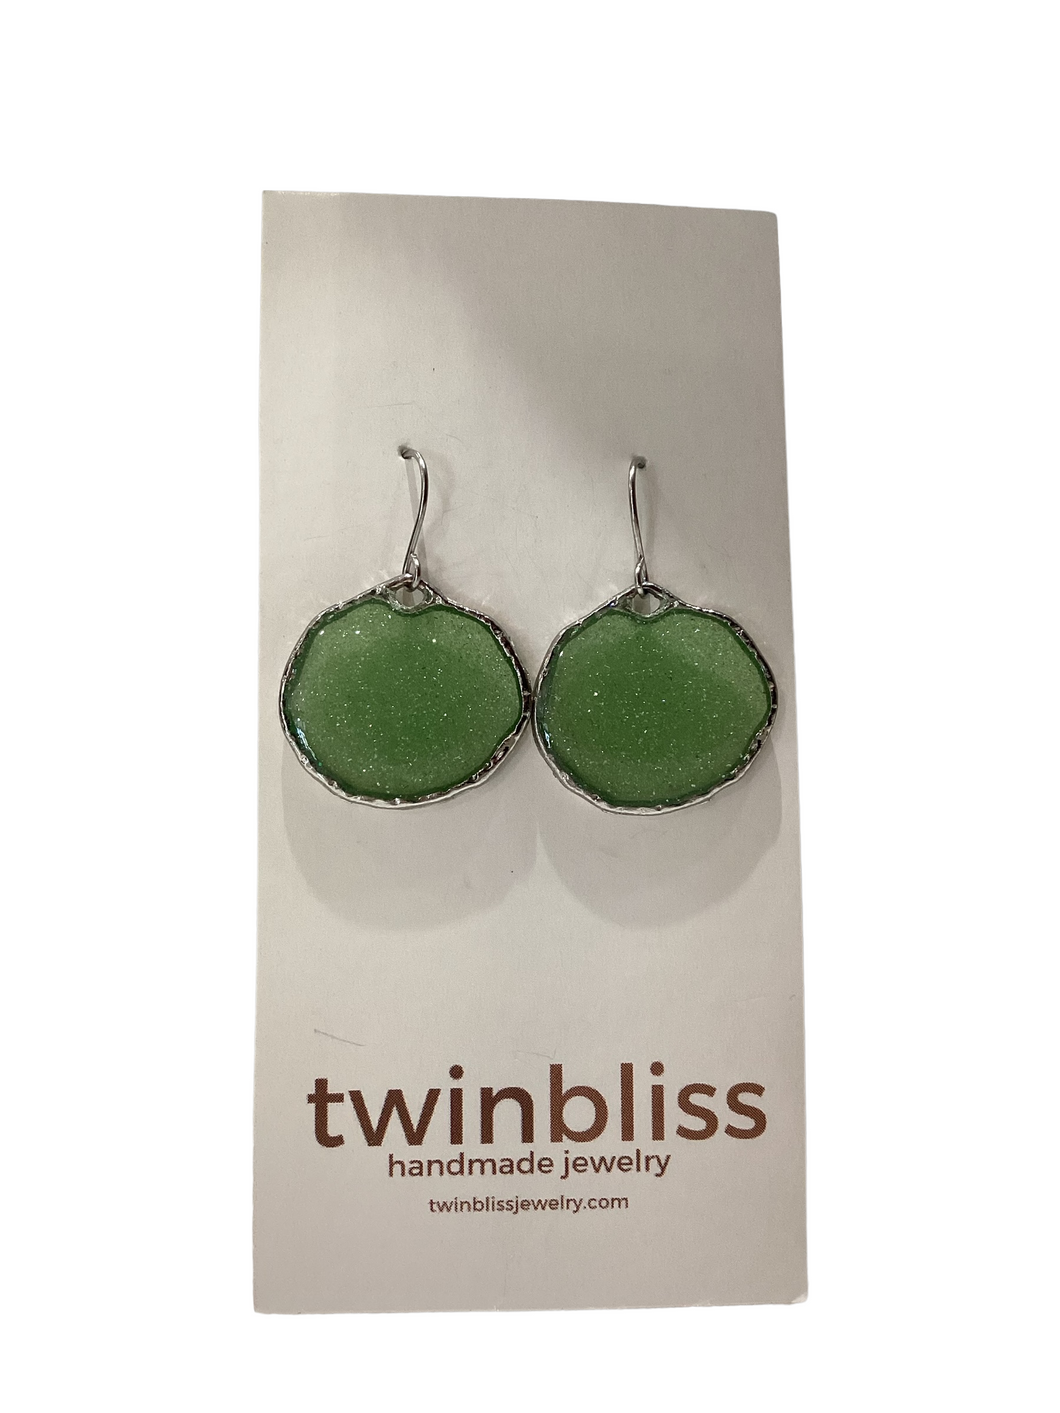 Sparkle + Shine Earrings - Small Round Green